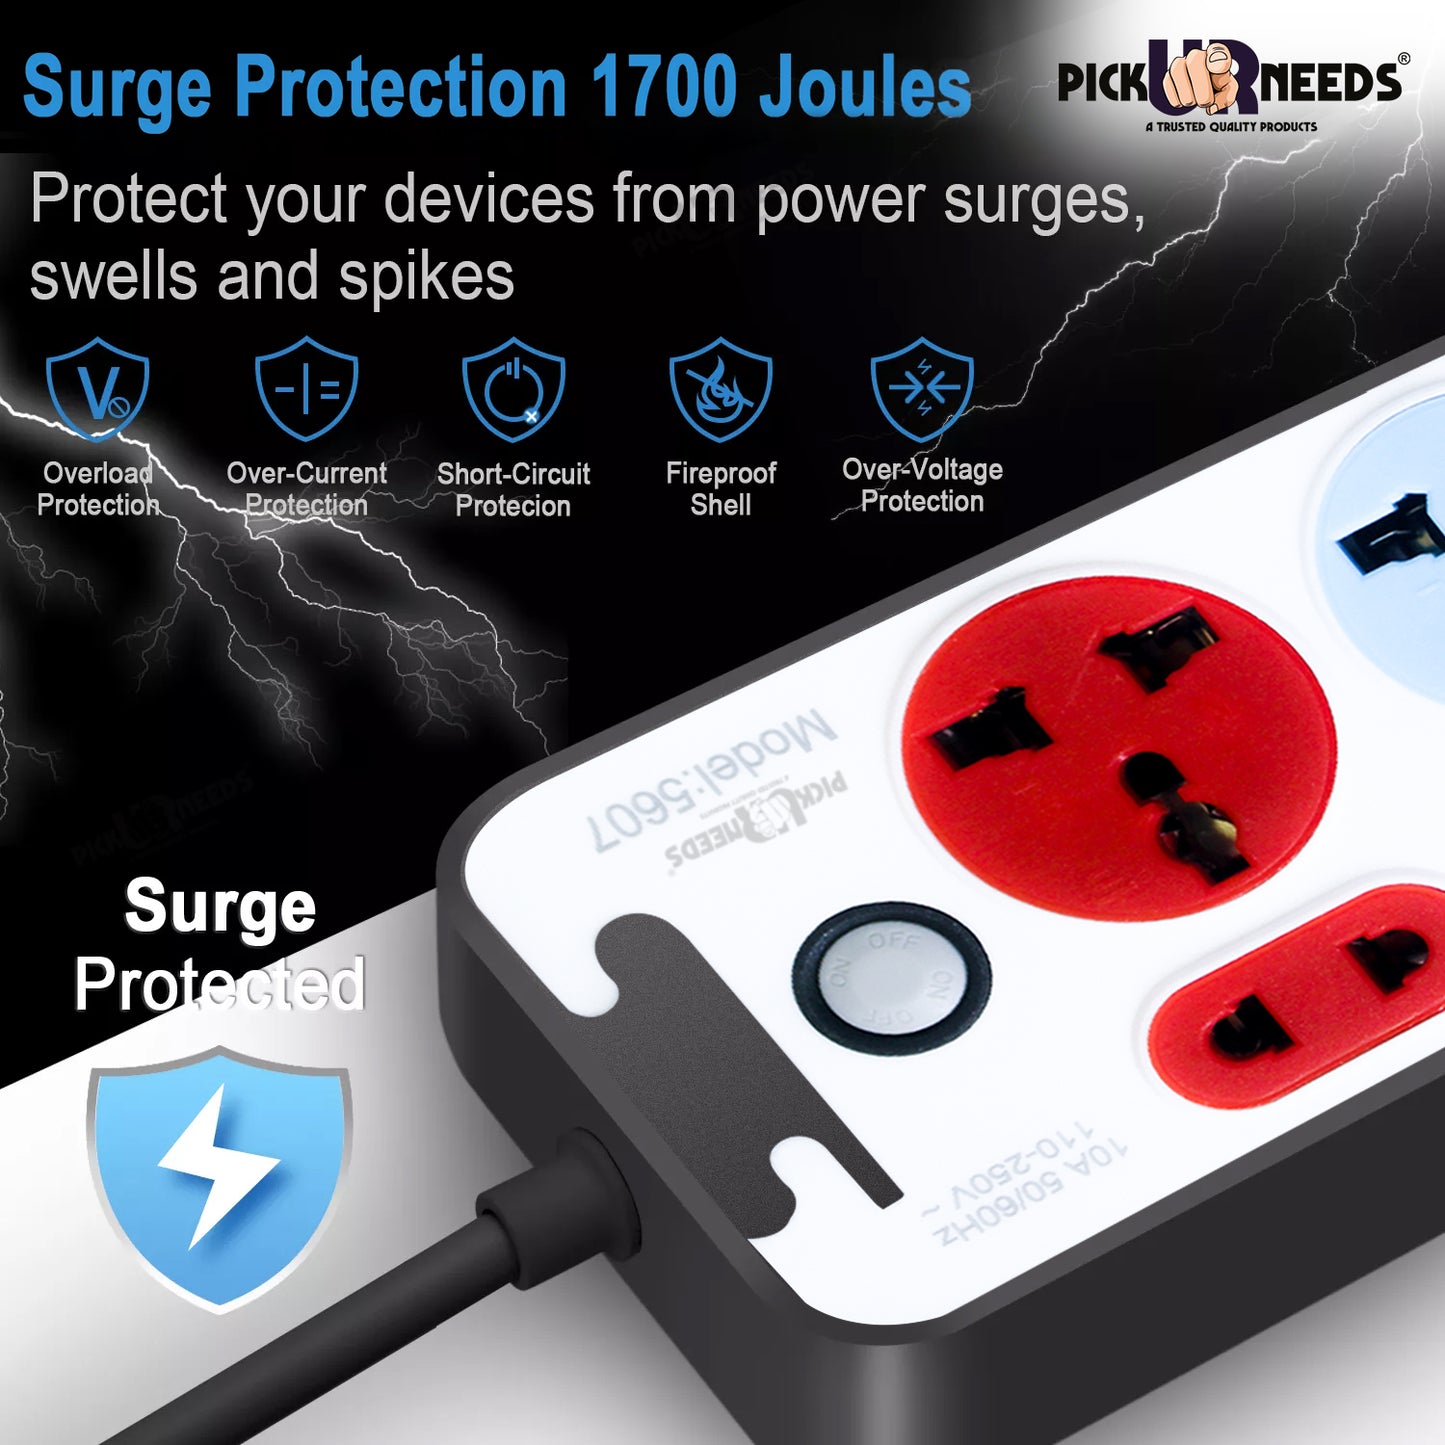 Pick Ur Needs Extension Cord 10A Dual USB Charger with Universal 2 Pin & 3 Pin Extension Boards